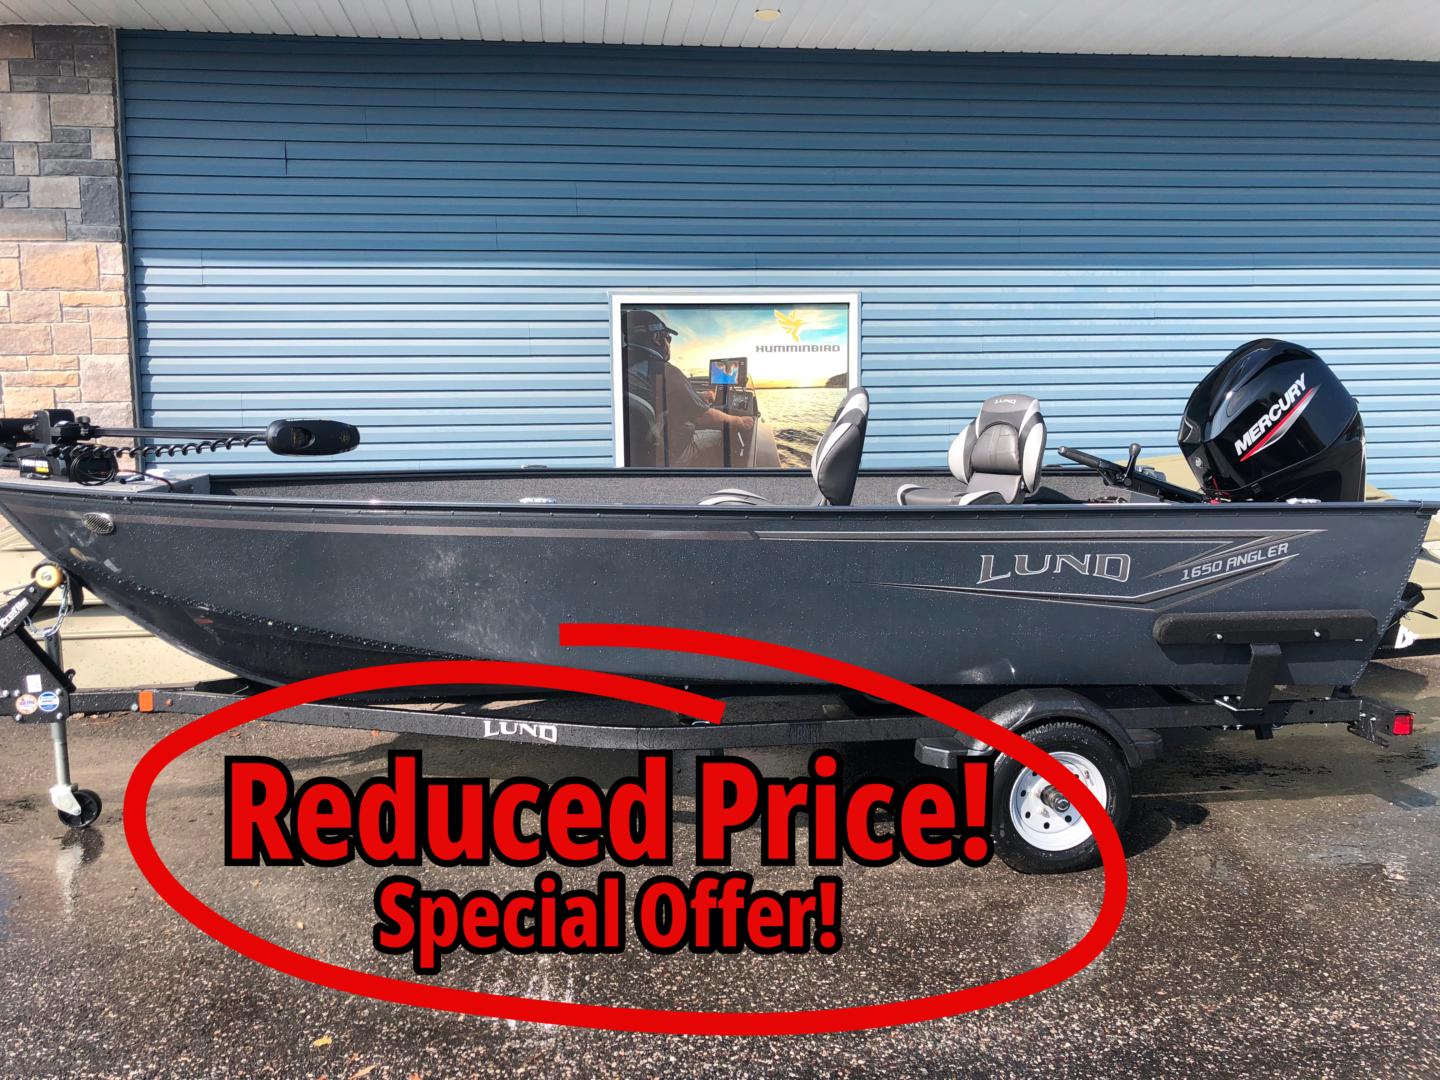 https://boaterschoice.ca/wp-content/uploads/2022/03/Reduced-Price-1650-Angler1.png